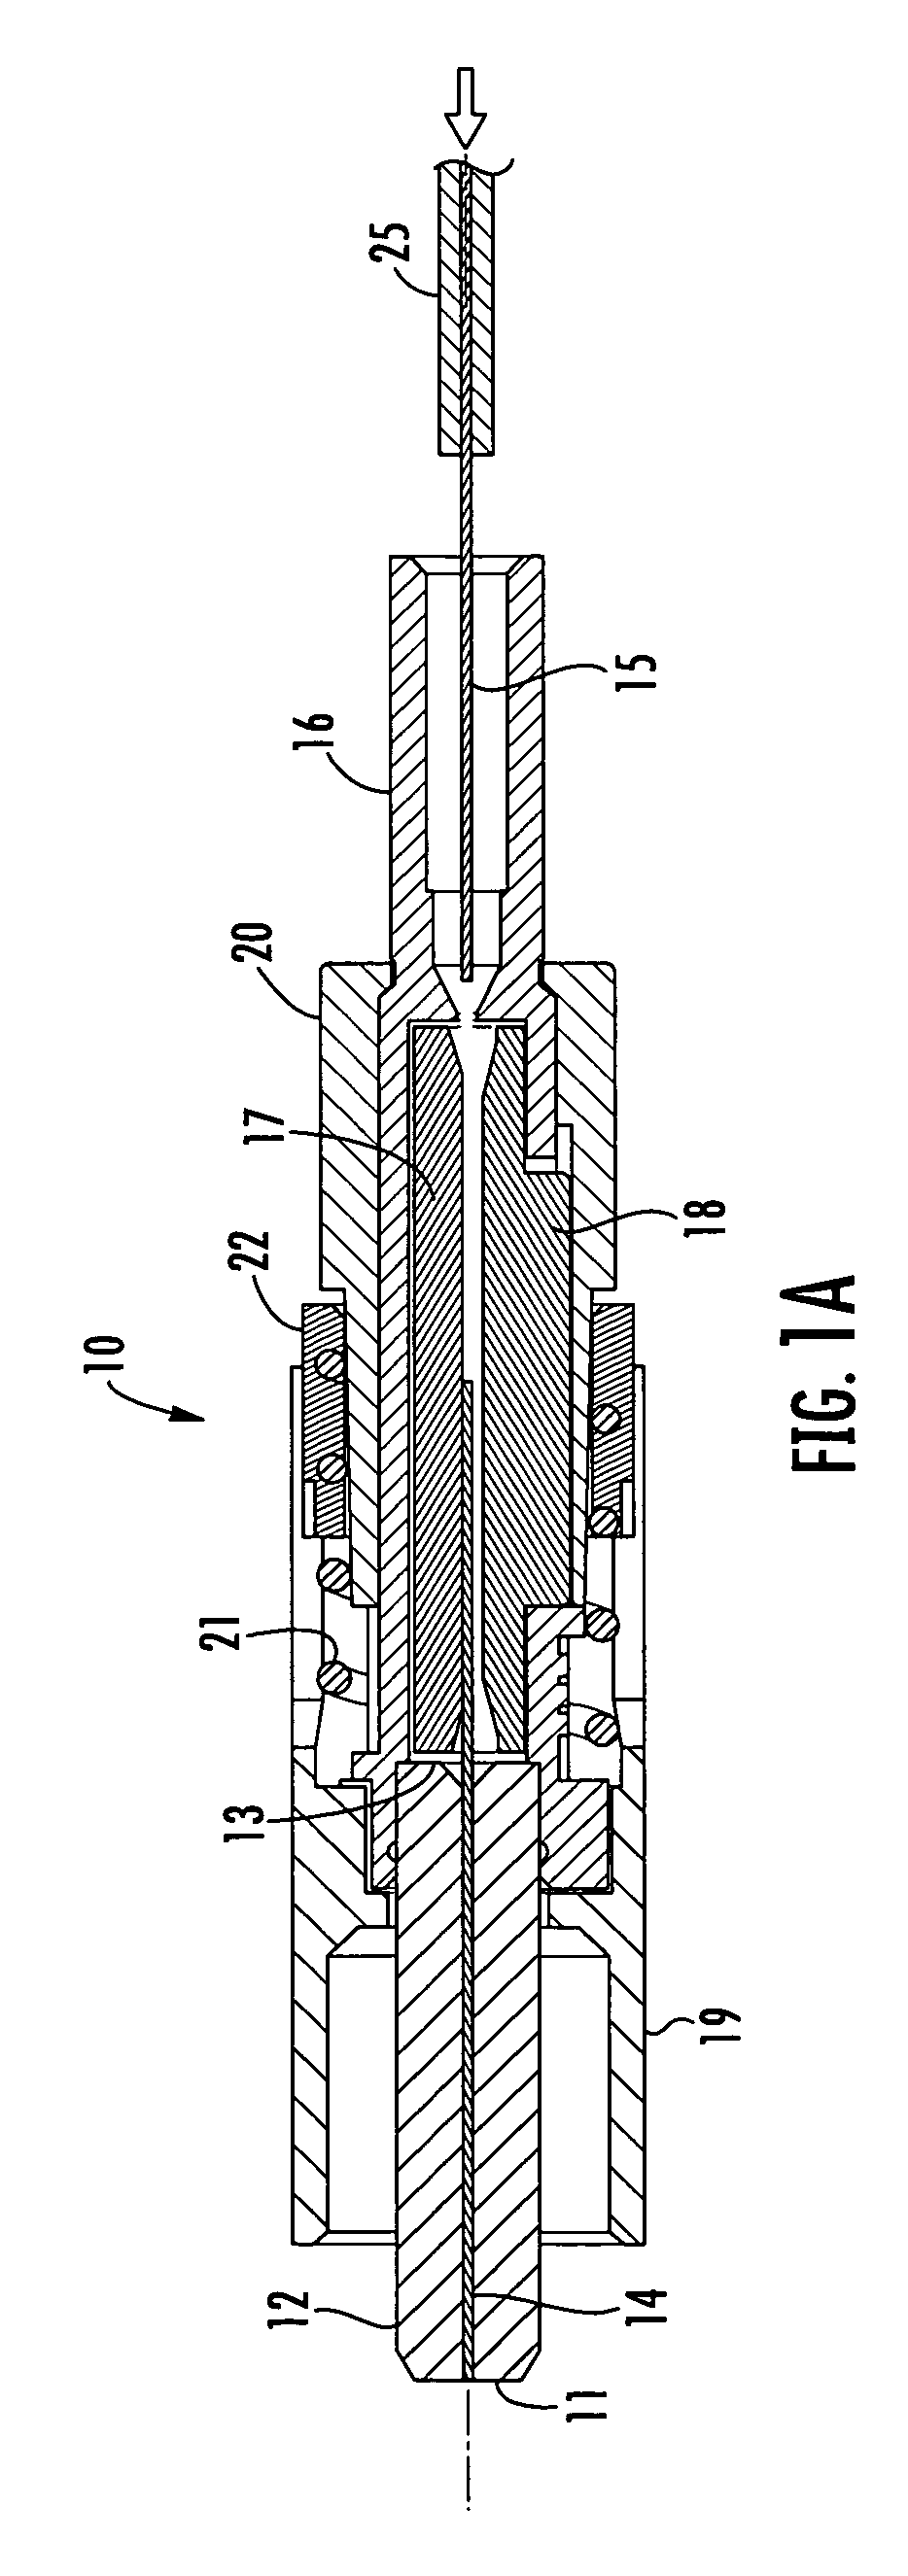 Installation tool with integrated visual fault indicator for field-installable mechanical splice connector